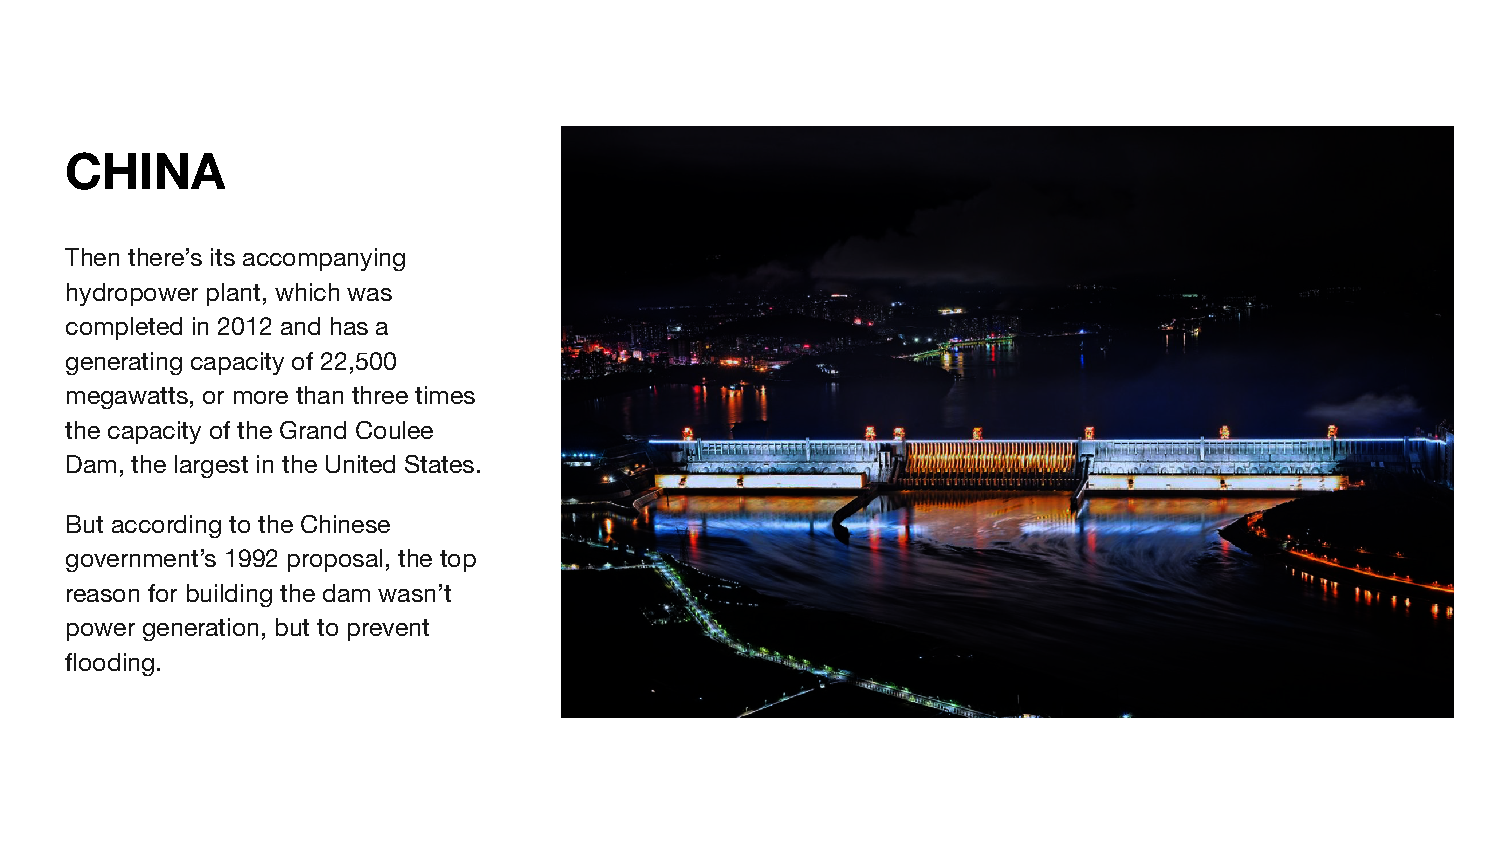 Text on the Three Gorges Dam in China accompanied by an image of the completed dam illuminated at night with land on either side.